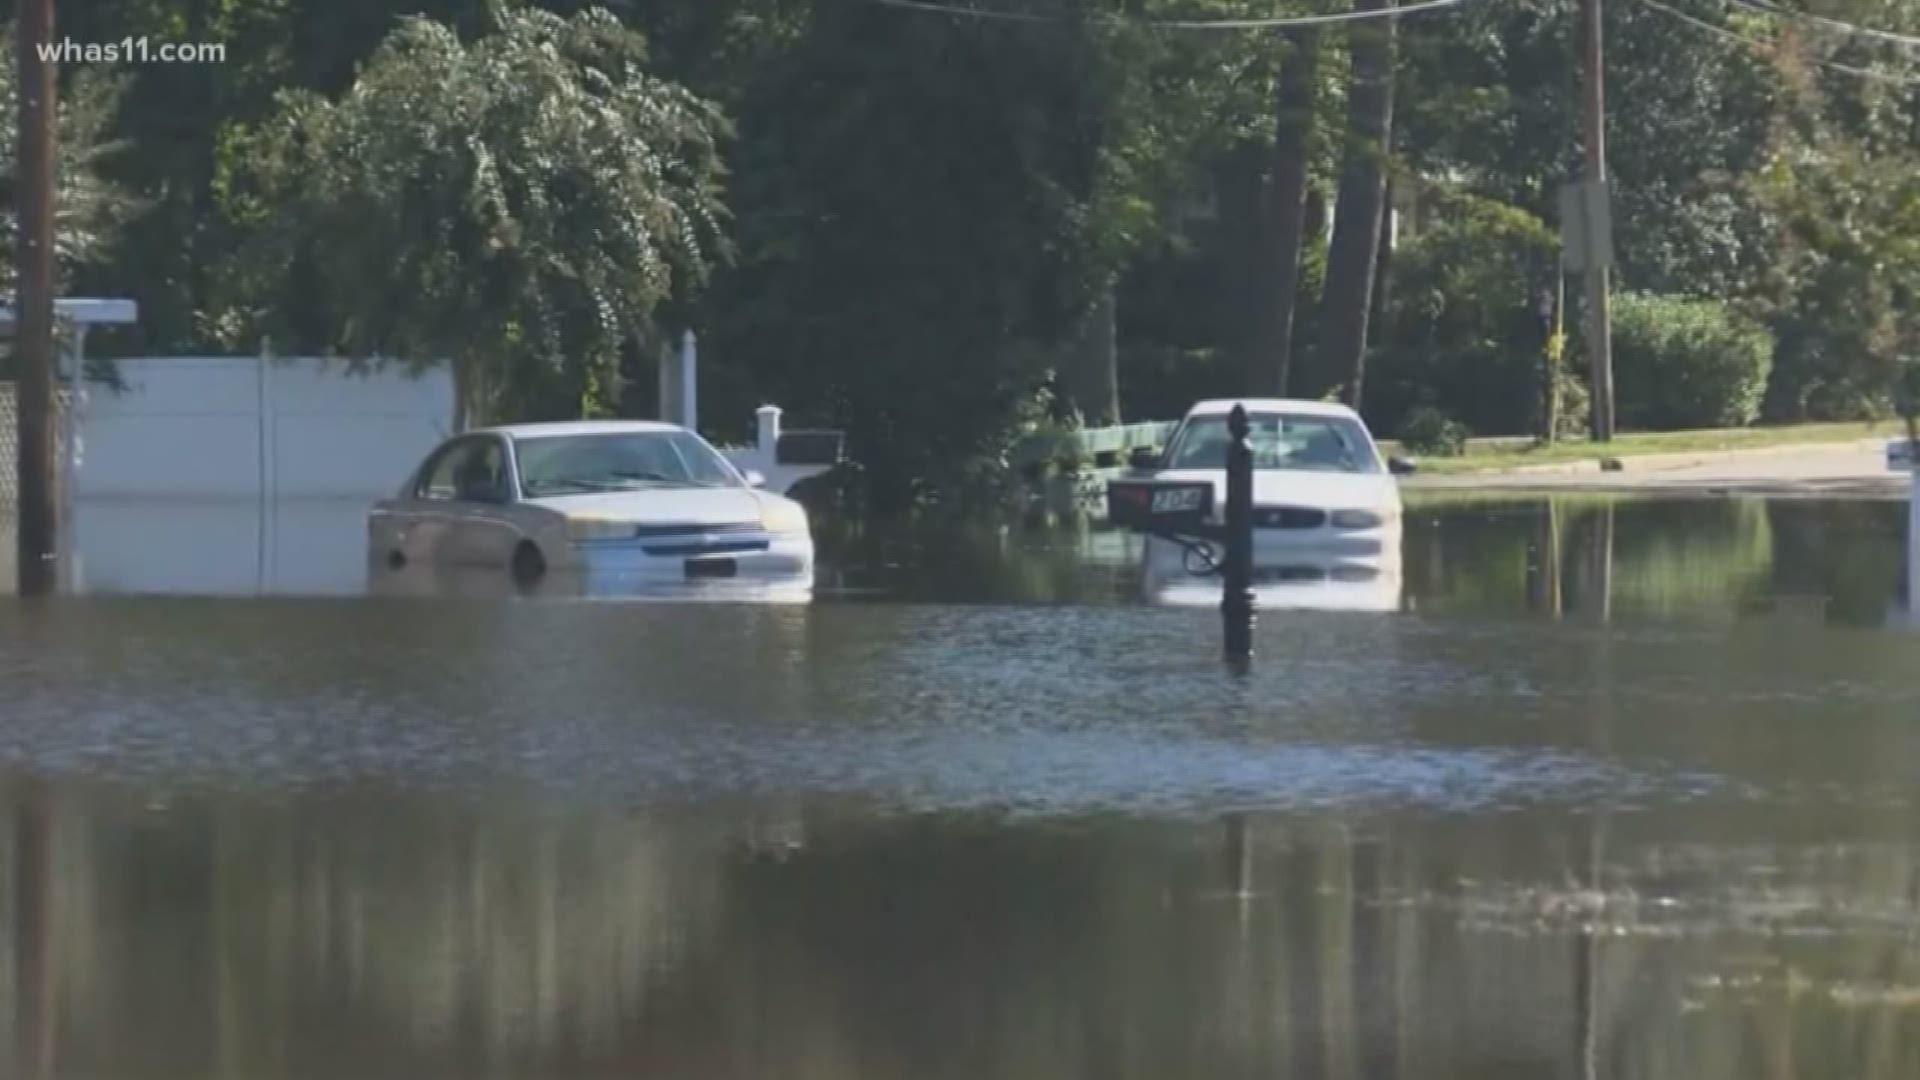 WHAS11's Dennis Ting has been in Lumberton, N.C. since Florence made landfall last Friday, Sept. 14.